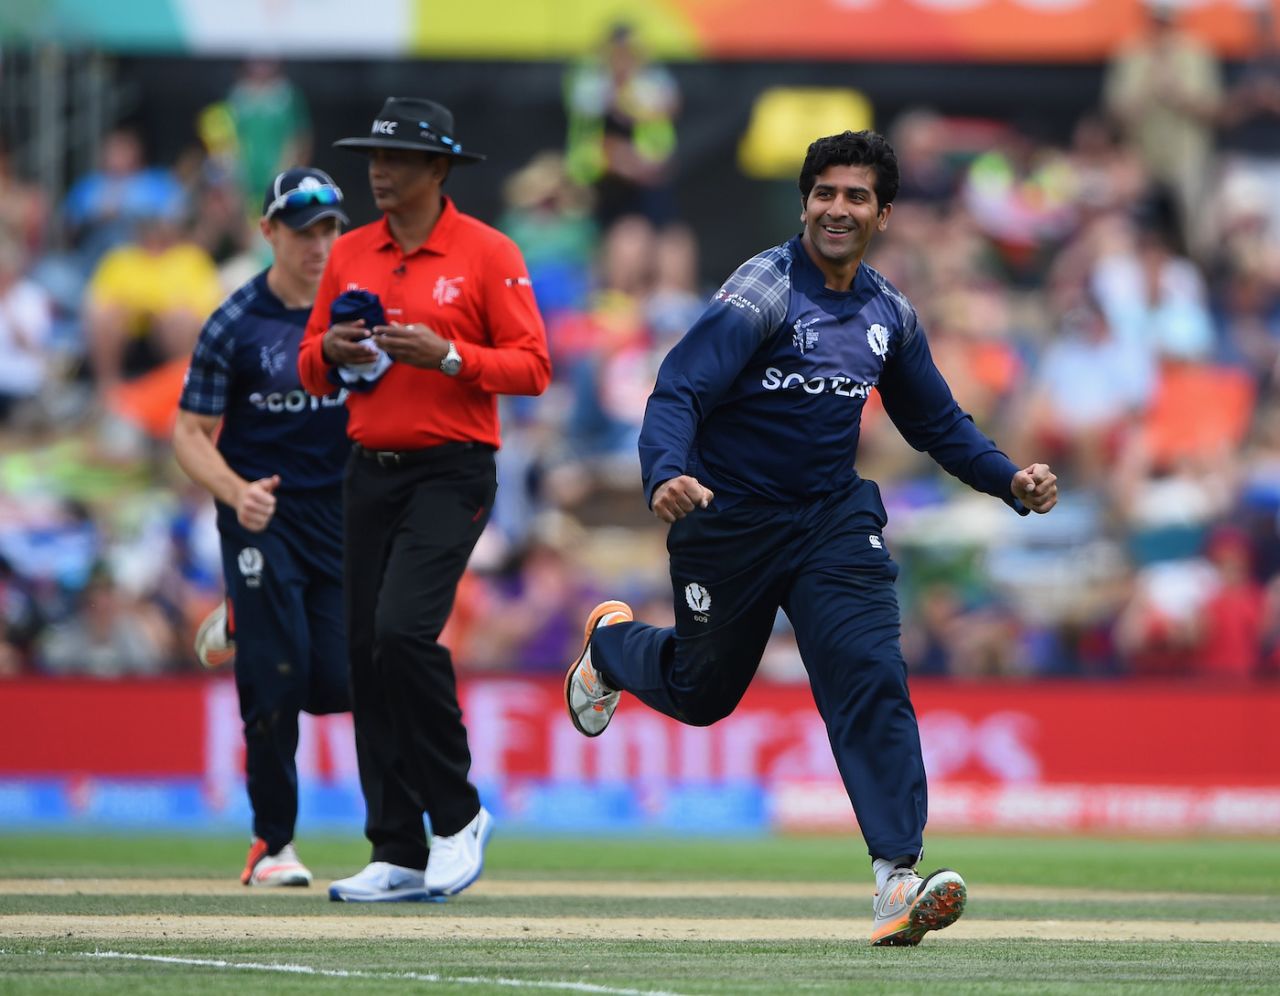 Majid Haq celebrates getting the wicket of Moeen Ali, England vs Scotland, World Cup 2015, Group A, Christchurch, February 23, 2015